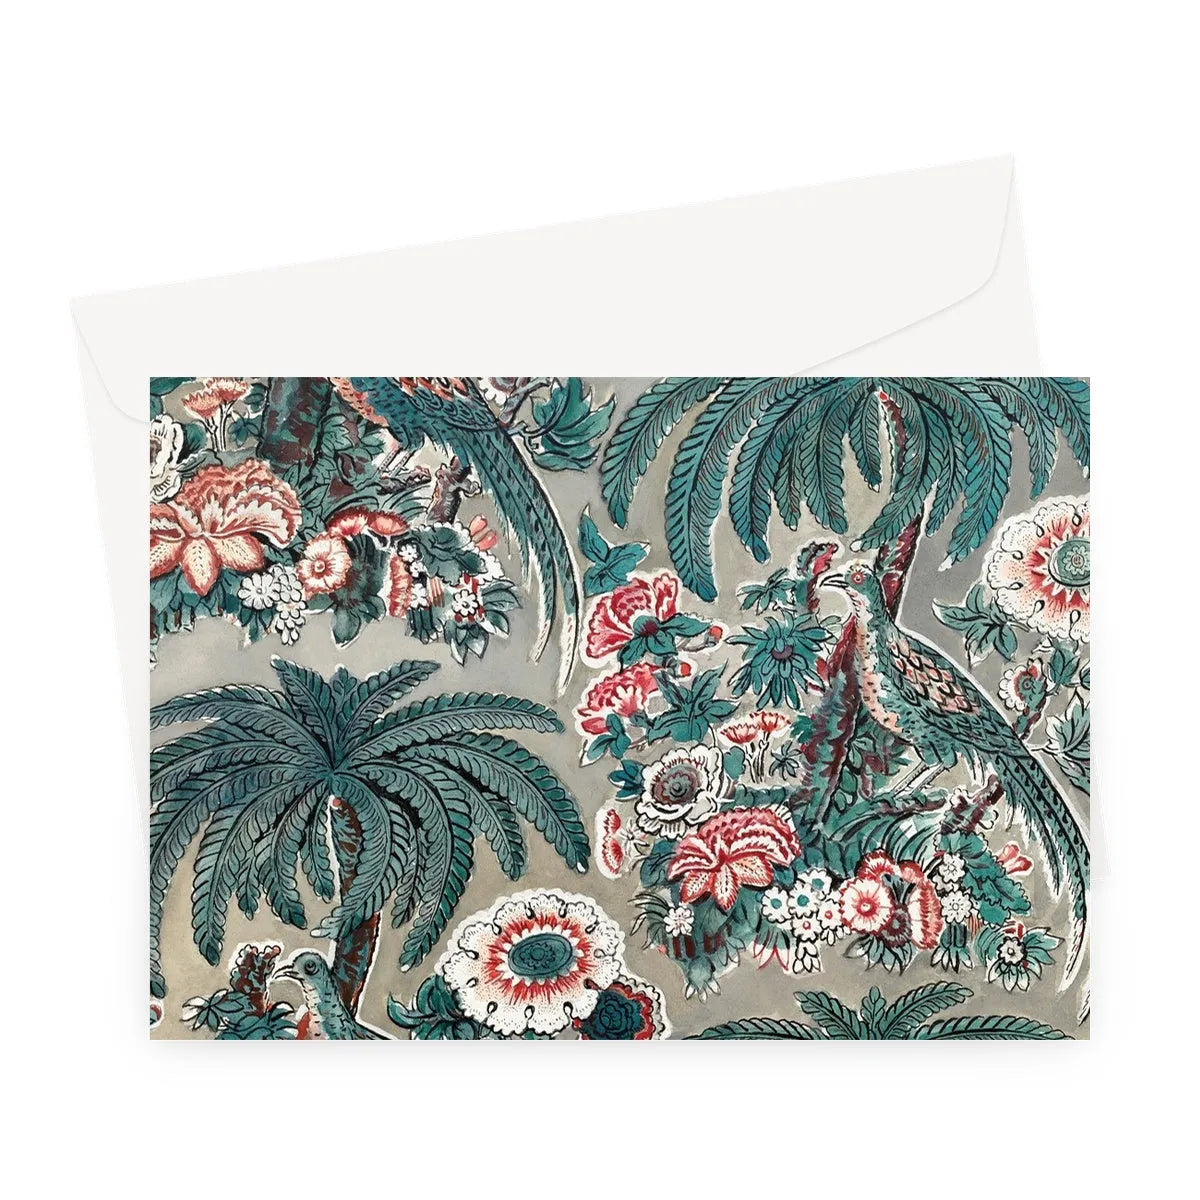 Chintz By George Loughridge Greeting Card - A5 Landscape / 1 Card - Notebooks & Notepads - Aesthetic Art